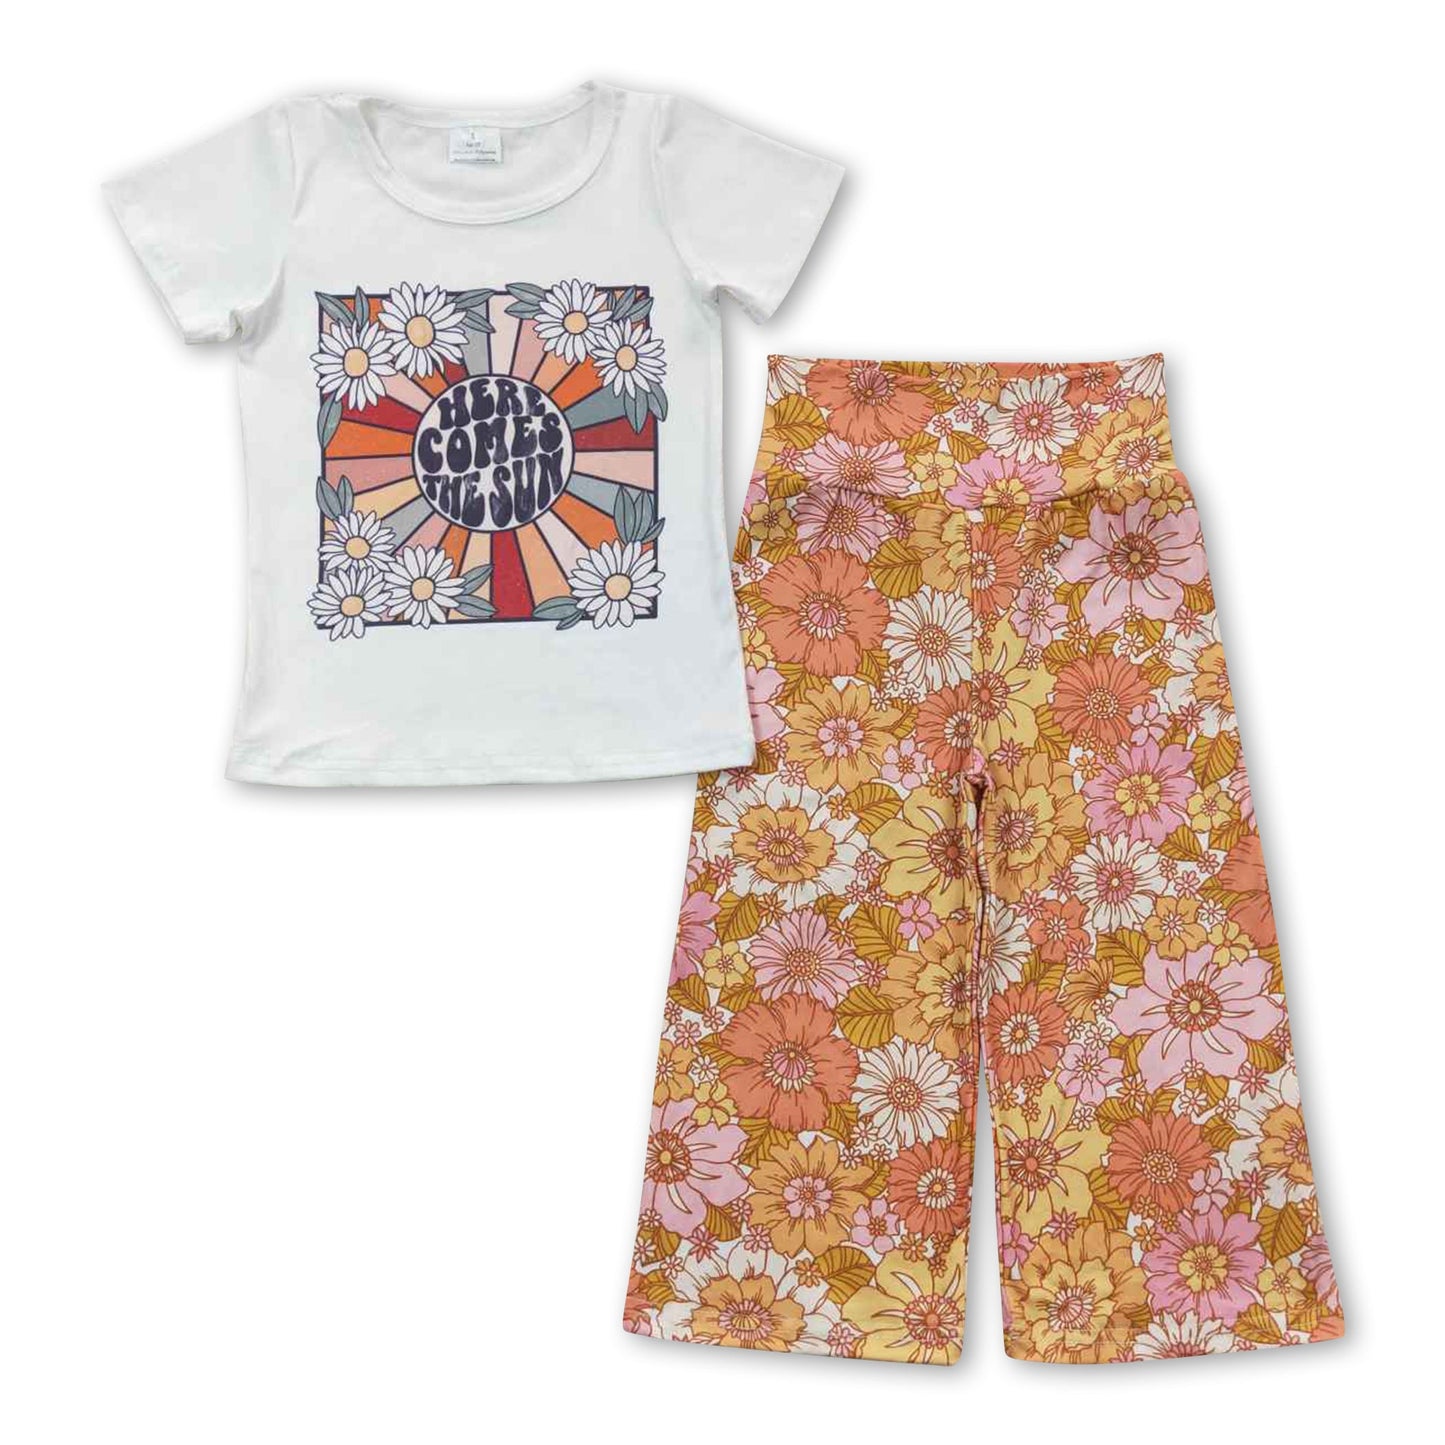 Here comes the sun shirt floral pants girls clothes